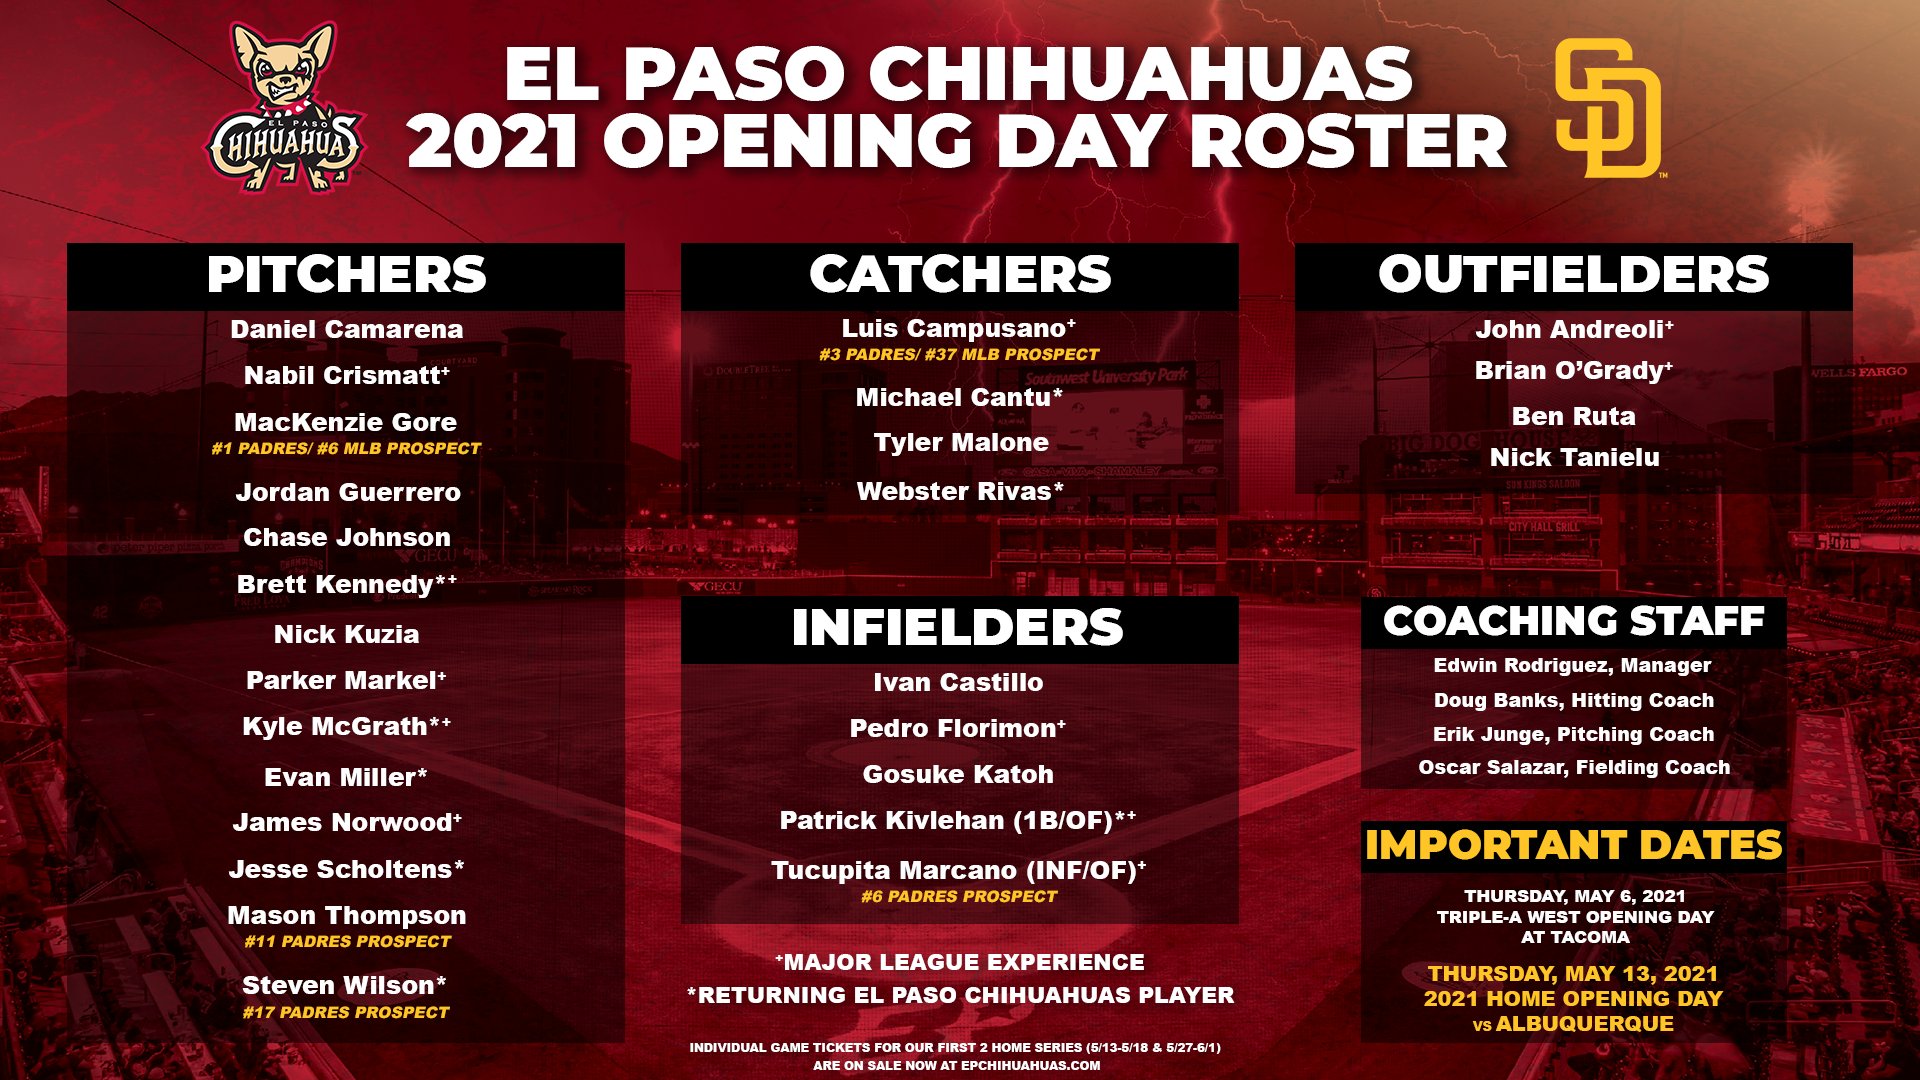 El Paso Chihuahuas on Twitter "Introducing your 2021 El Paso